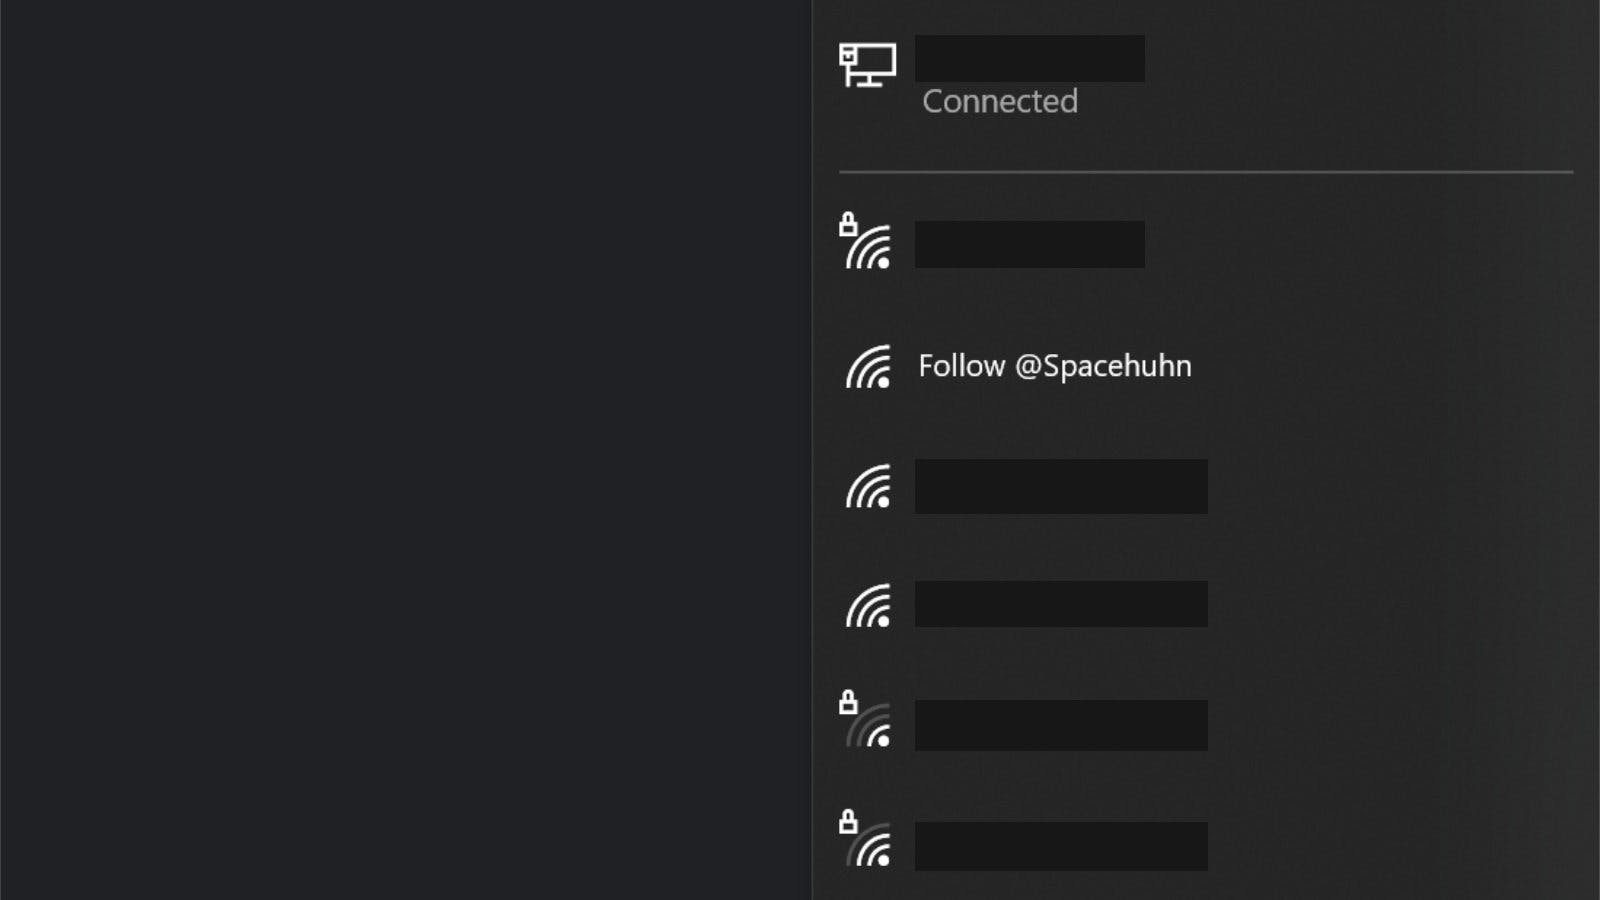 Fake network showing up in the list of available WiFi networks